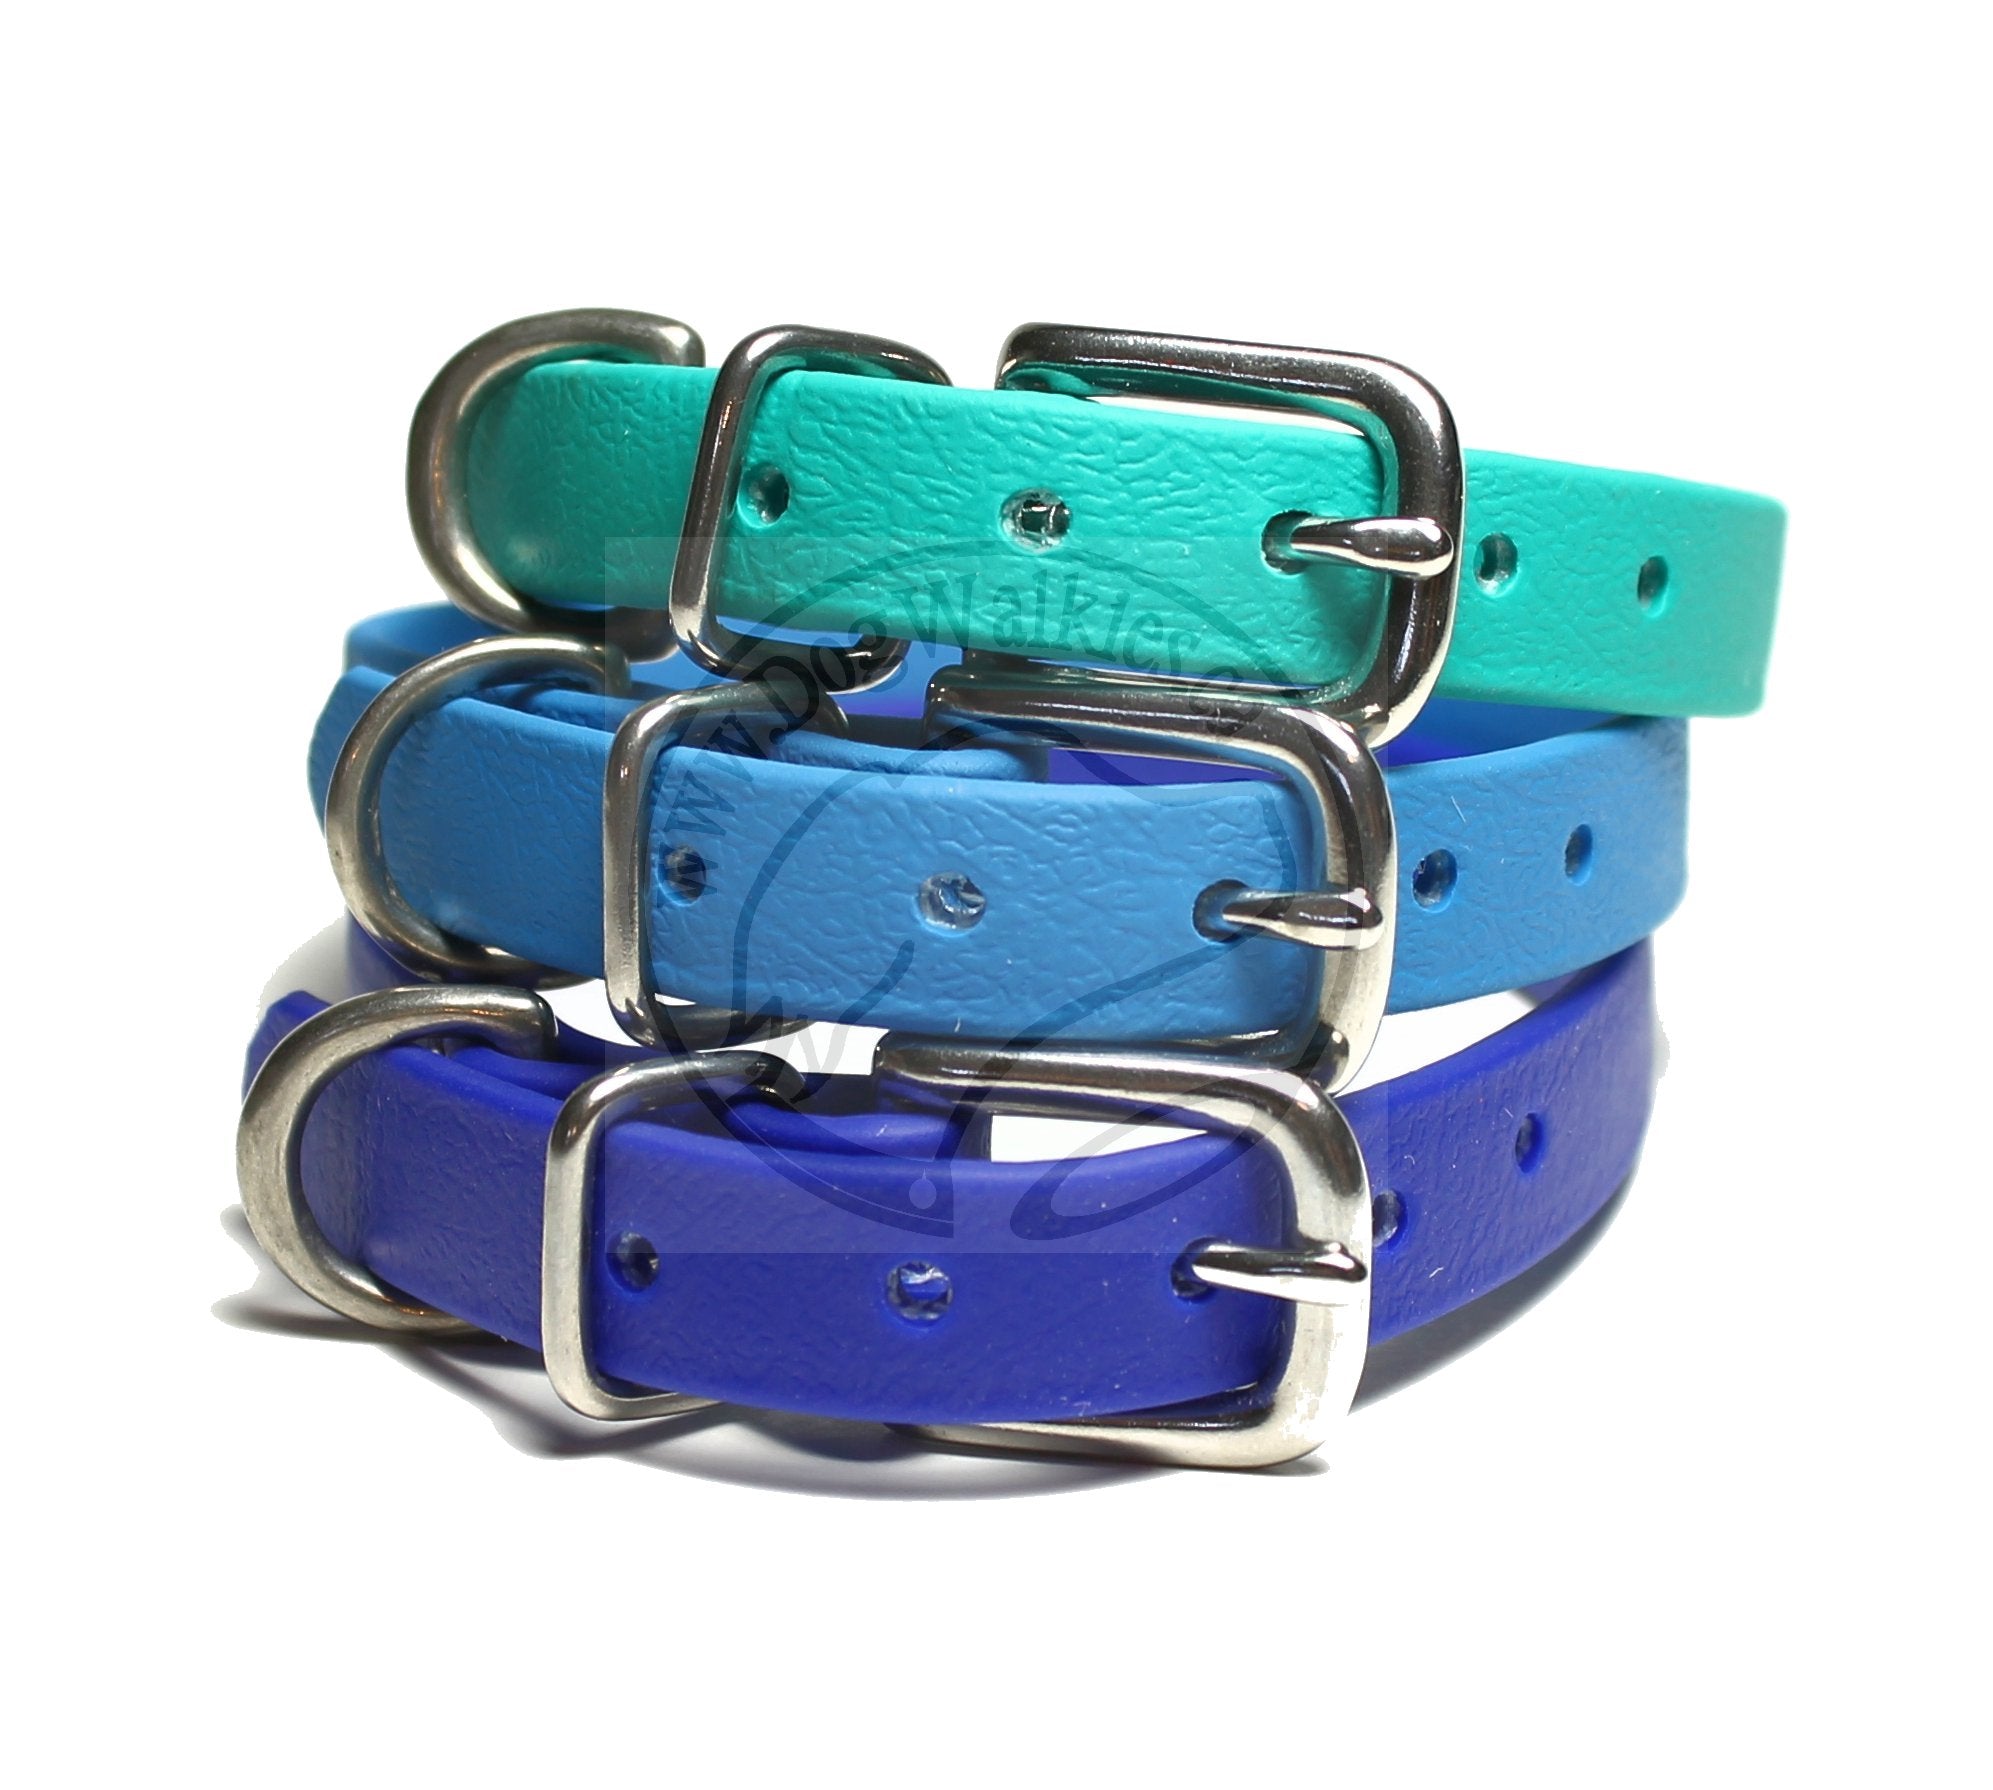 Teal Biothane Small Dog Collar - 1/2" (12mm) wide